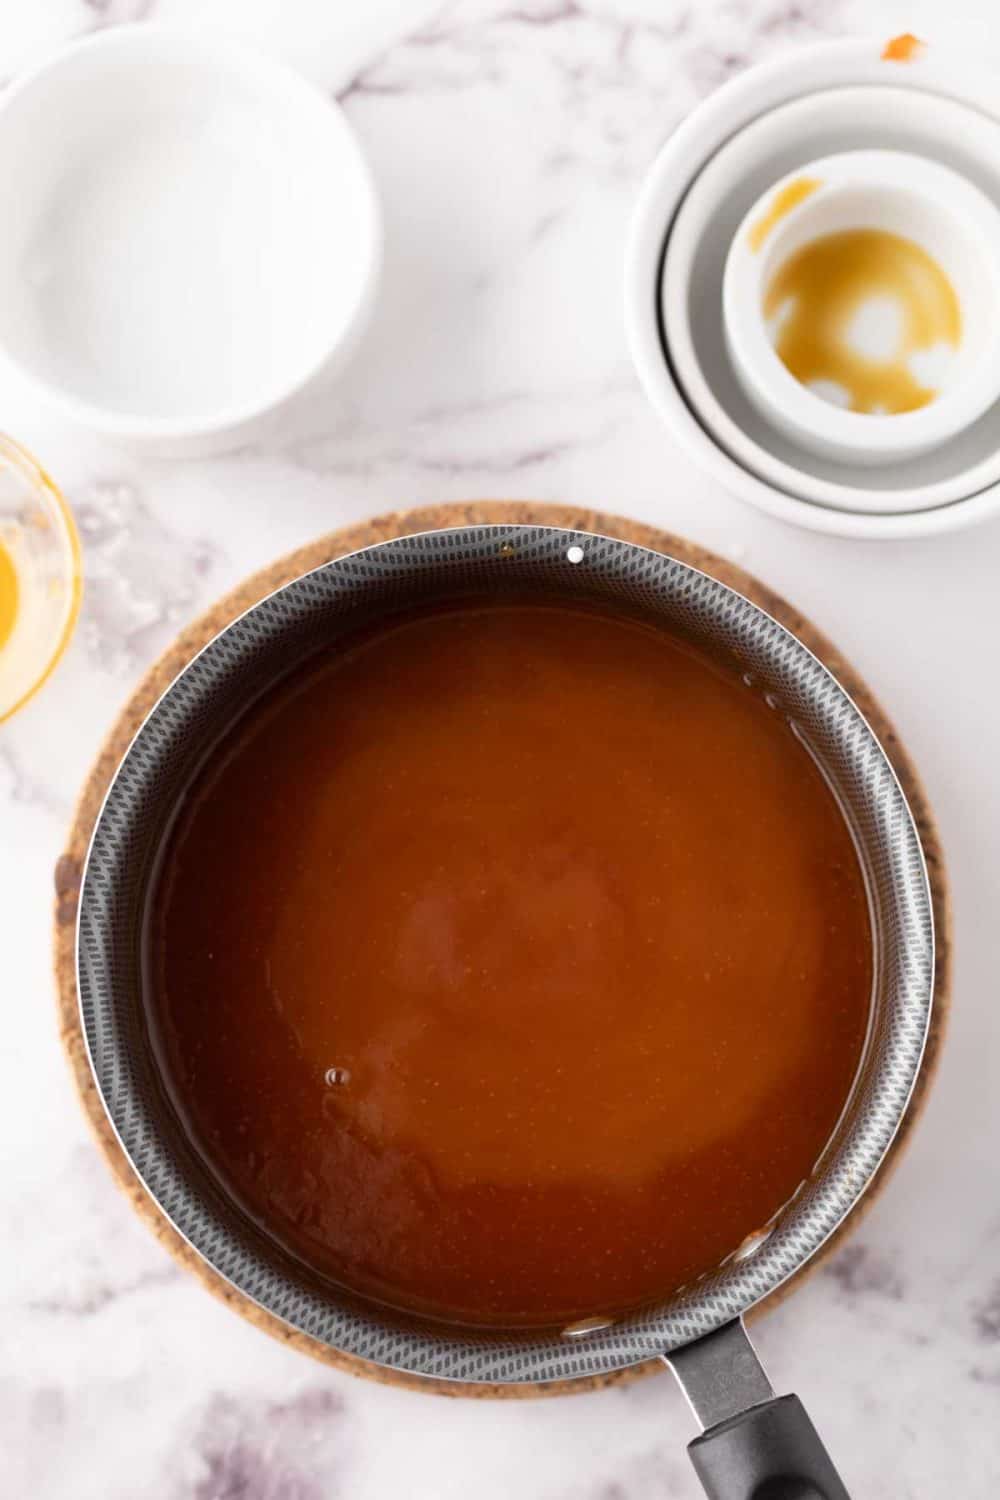 Pan of sweet and sour sauce.